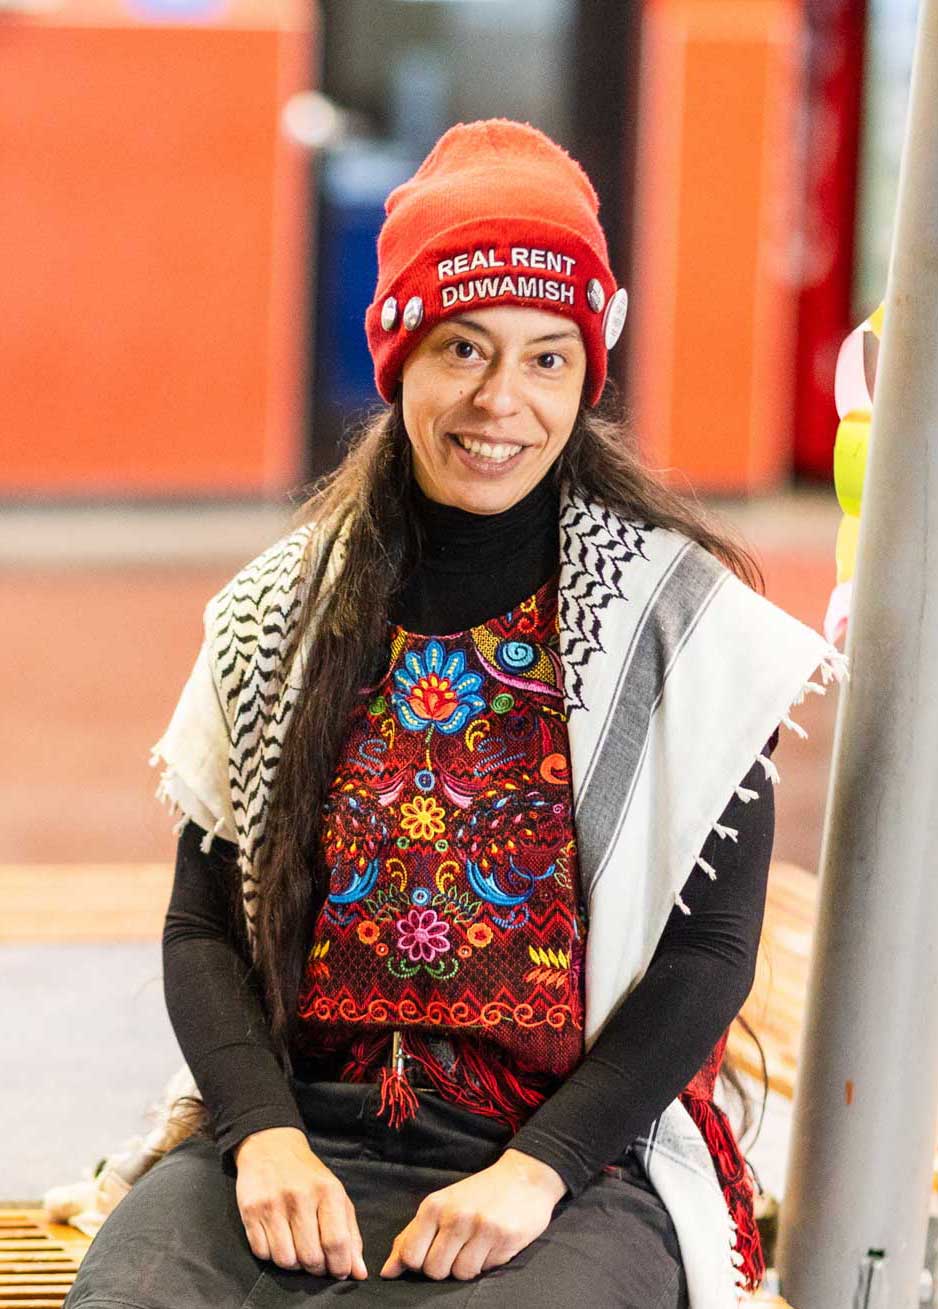 Saunatina Sanchez, candidate for Seattle City Council Position 8 sits on a bench at a transit station.  She is wearing a red Real Rent Duwamish beanie over her long dark hair.  She is smiling into the camera.  He is wearing a floral embroidered shirt .